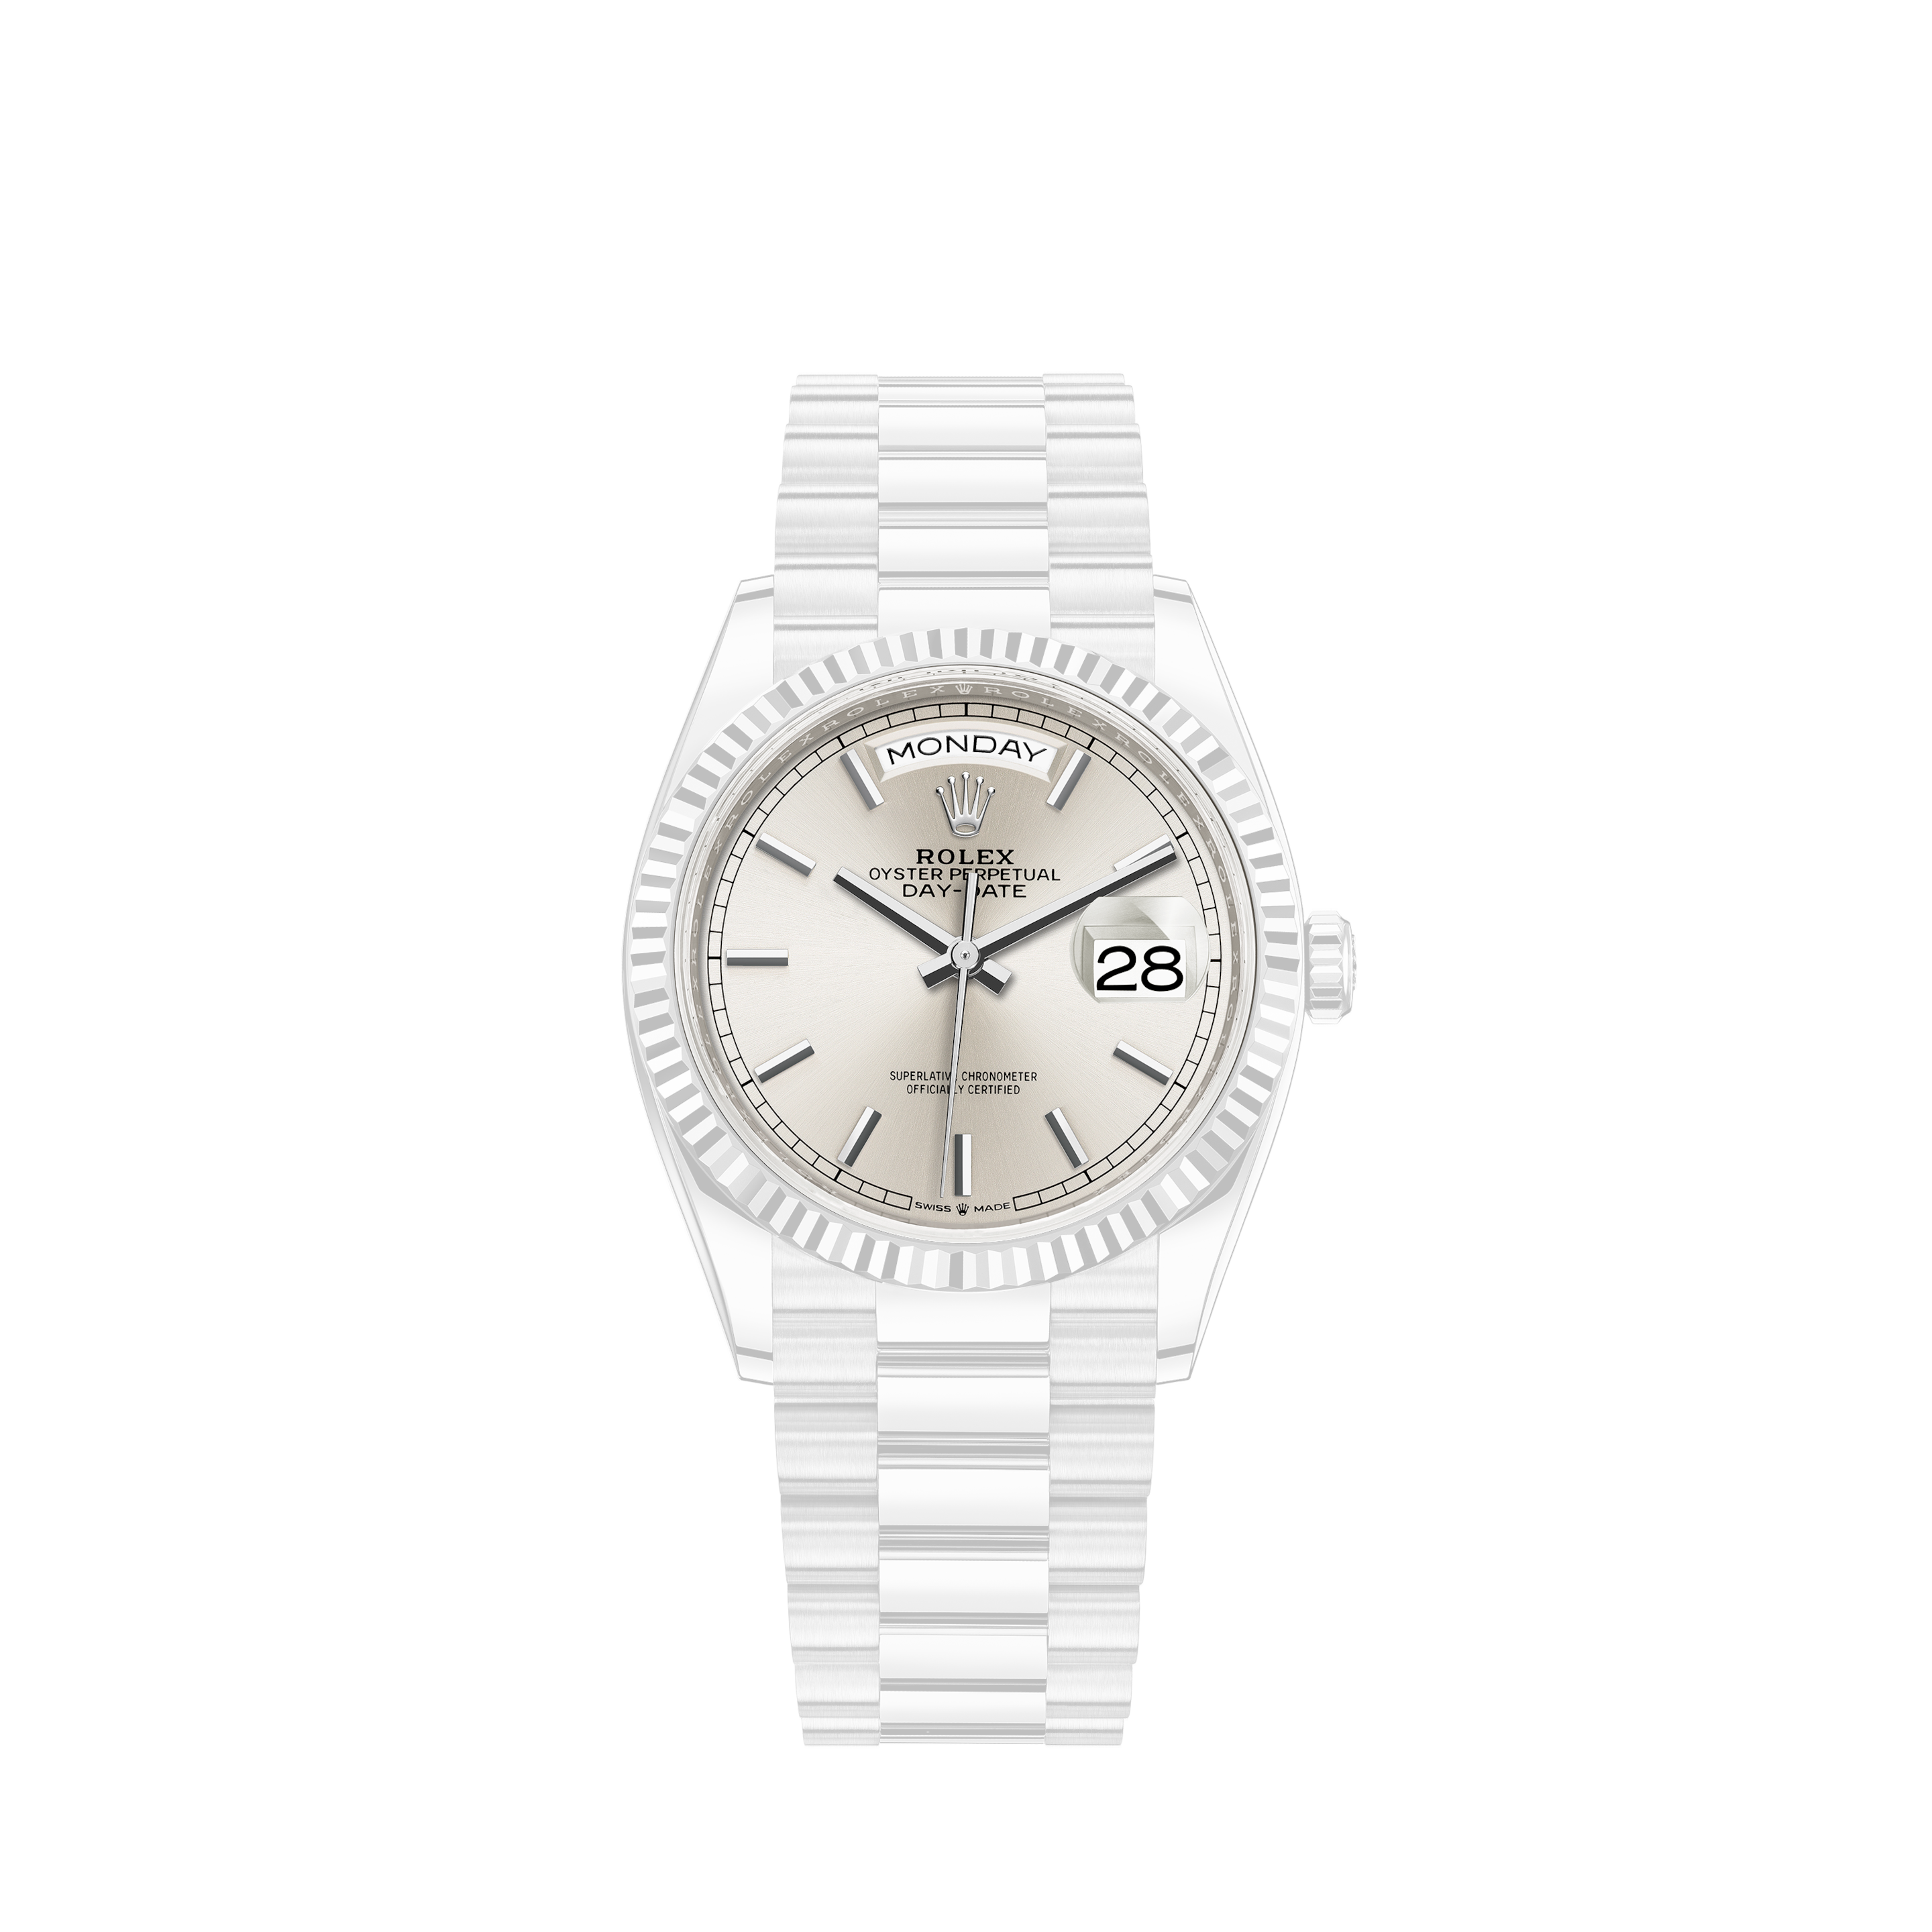 Rolex Women's New Style Two-Tone Datejust with Custom Blue Diamond Dial on Oyster BandRolex Women's New Style Two-Tone Datejust with Custom Champagne Diamond Dial